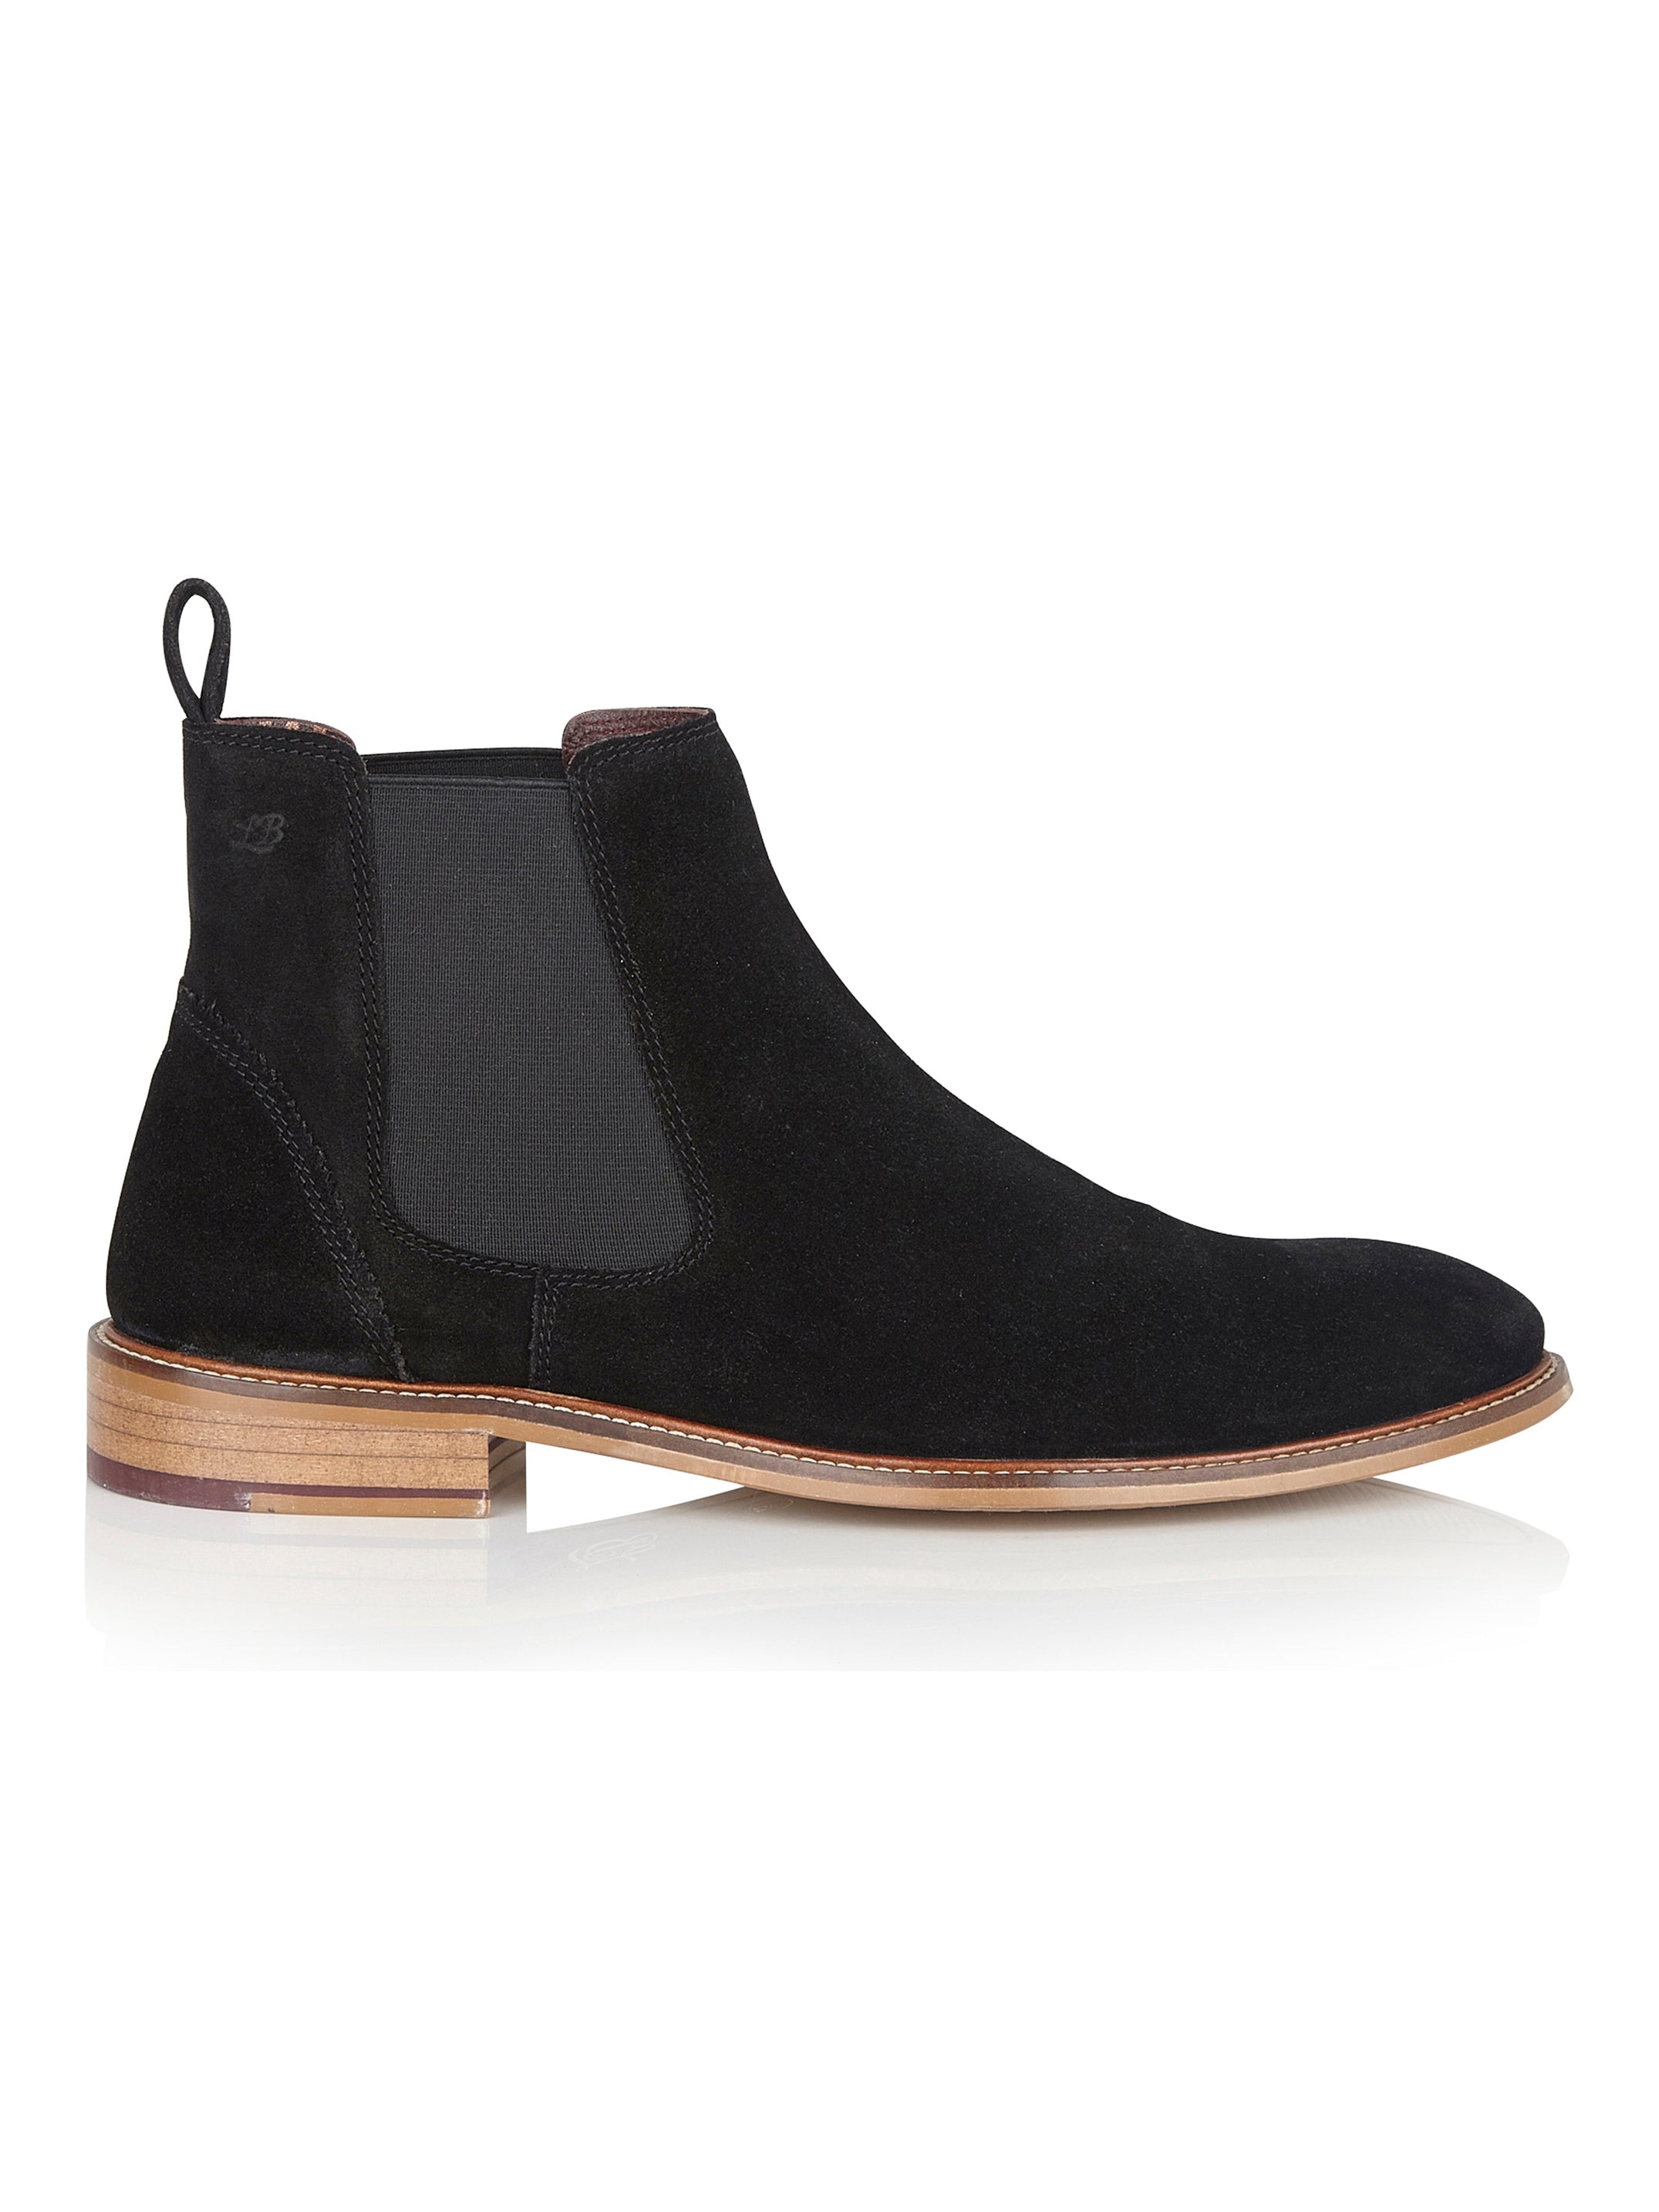 SUEDE CHELSEA BOOTS IN BLACK